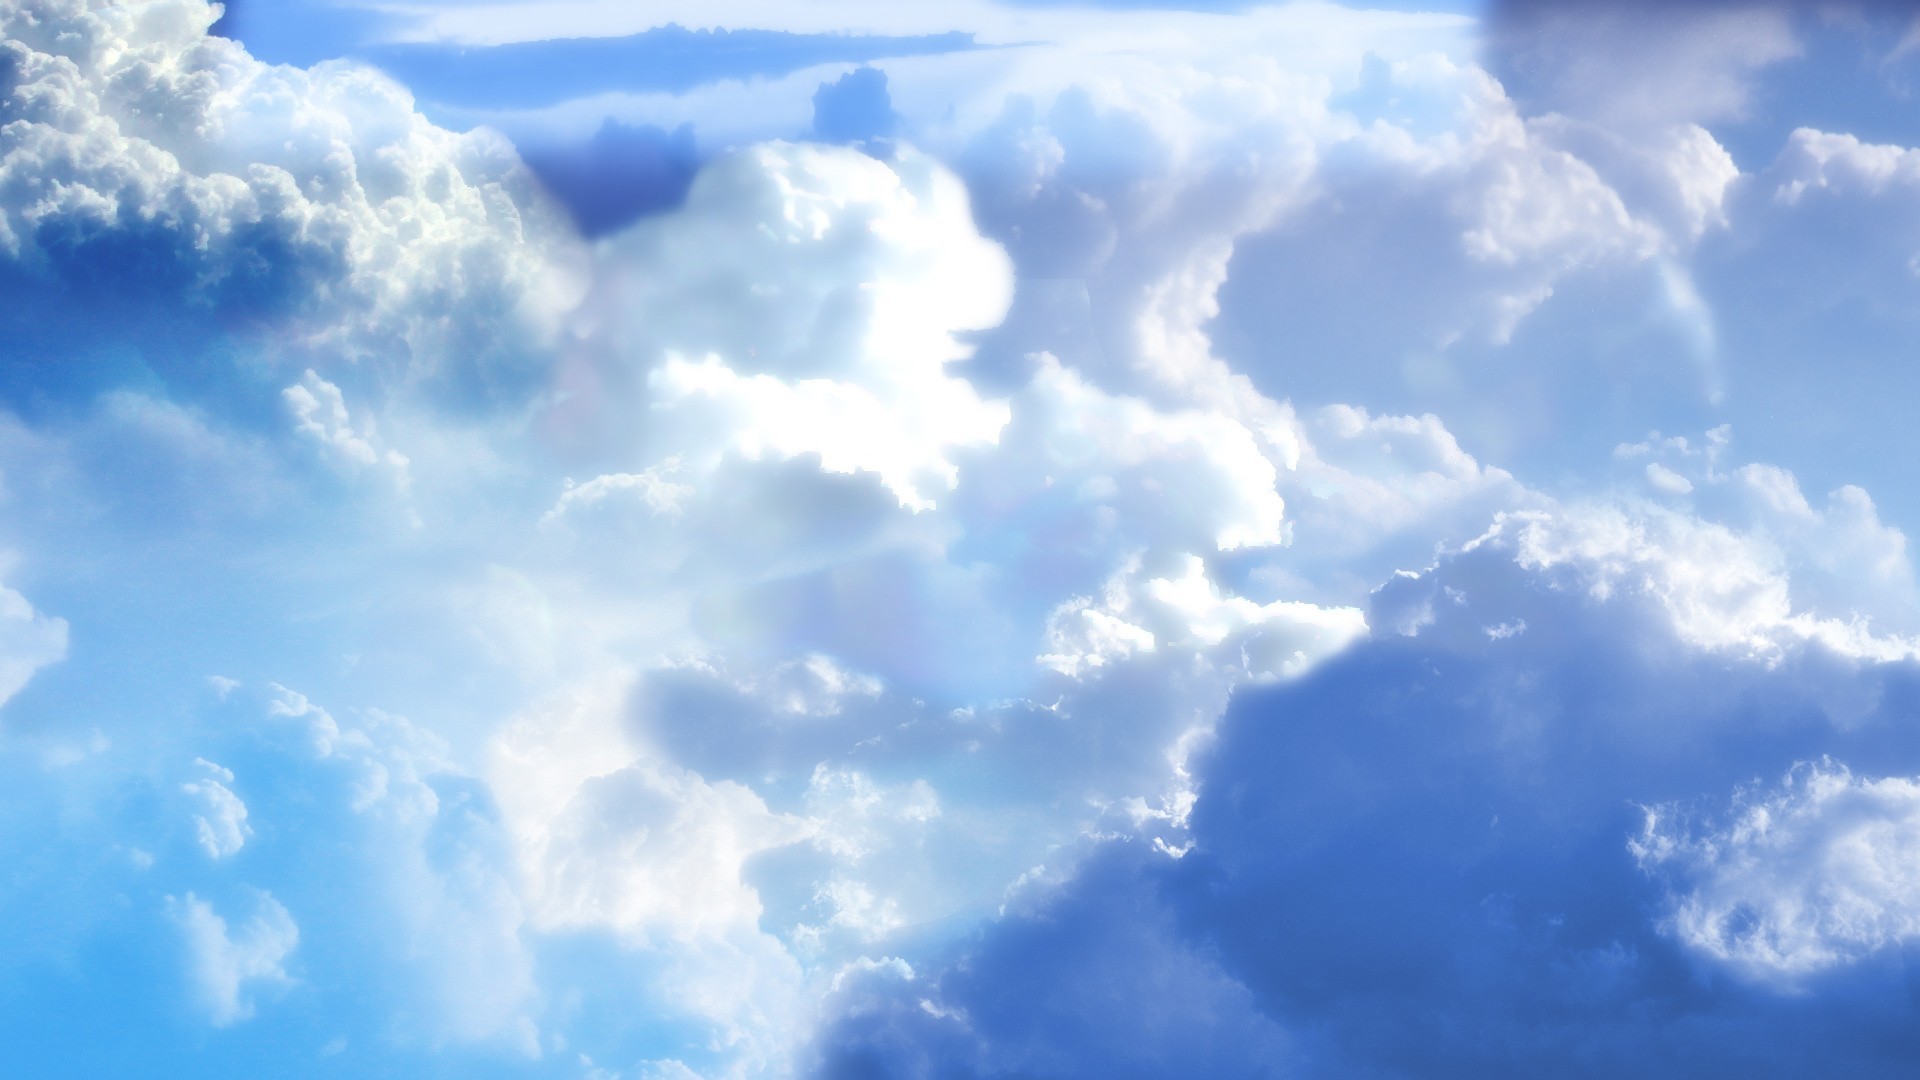 1920x1080 Images for Gt Sky Clouds Wallpaper Hd px